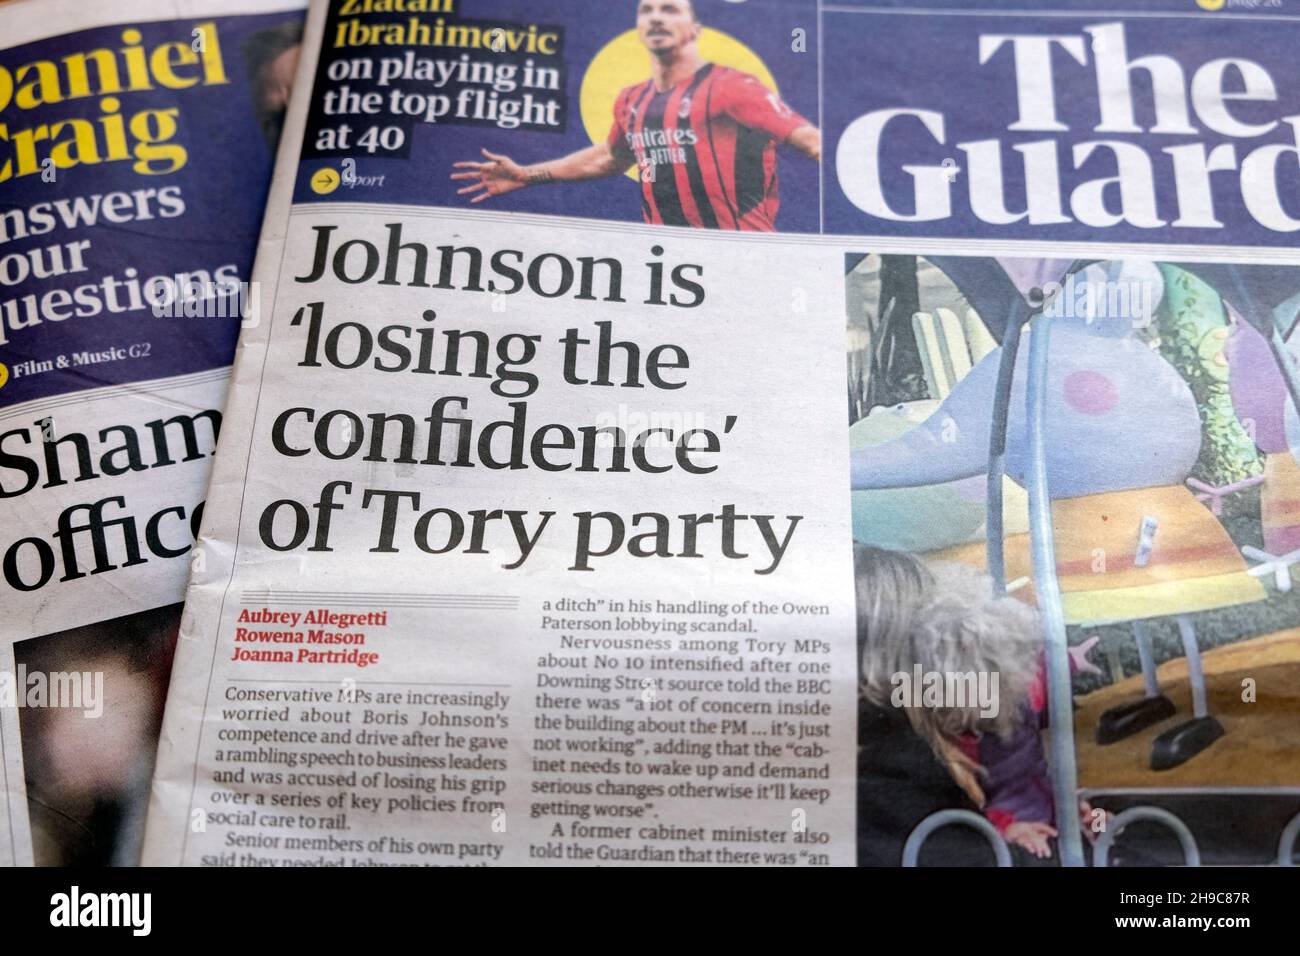 Boris 'Johnson is losing the confidence of Tory party' Guardian newspaper headline 10 Downing Street front page on 23 November 2021 London England UK Stock Photo